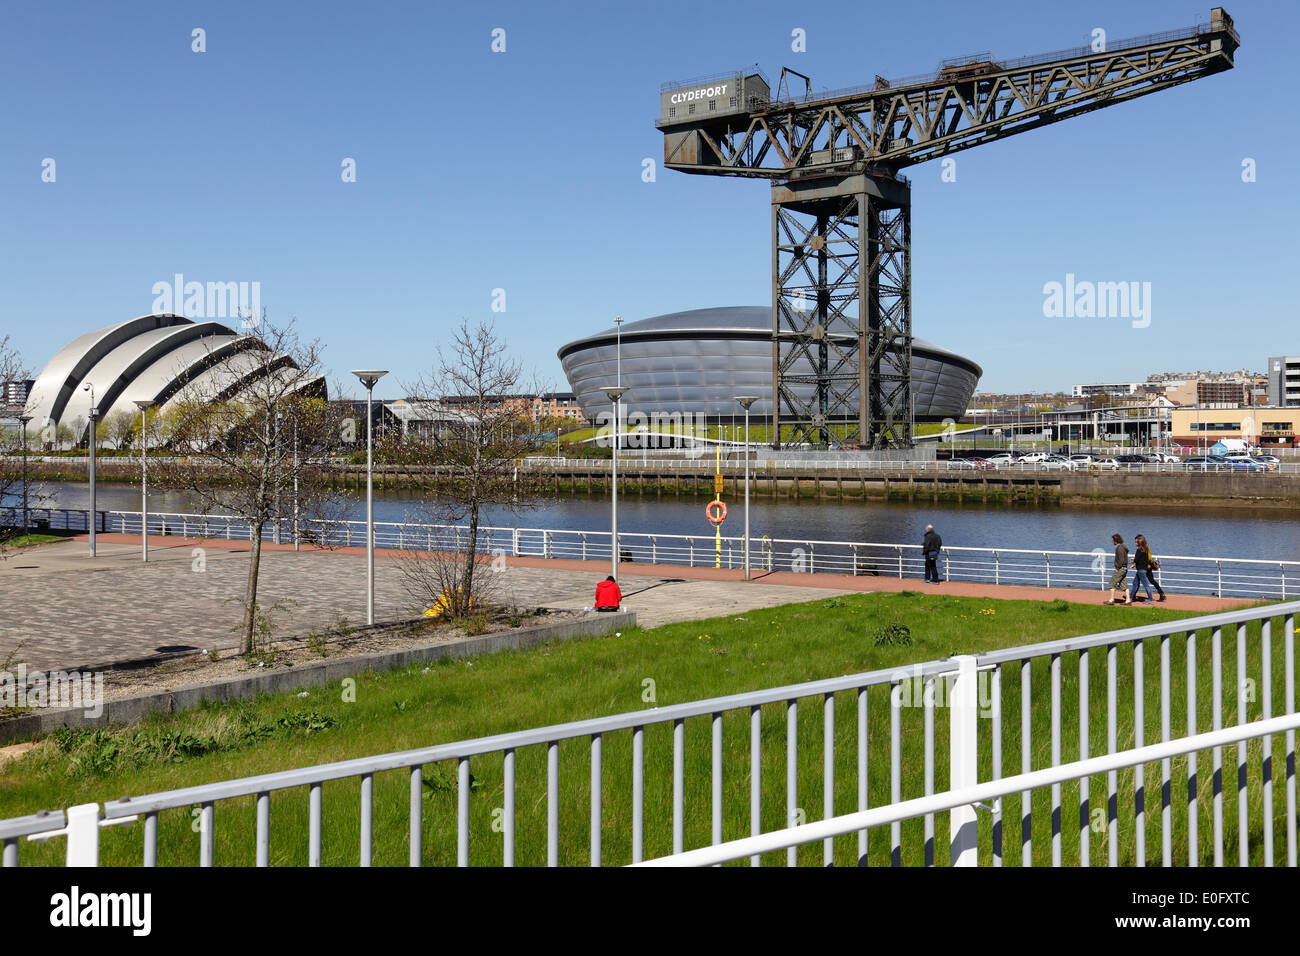 The Clyde Auditorium / Armadillo, Scottish SSE Hydro and Finnieston Crane beside the River Clyde in Glasgow, Scotland, UK Stock Photo